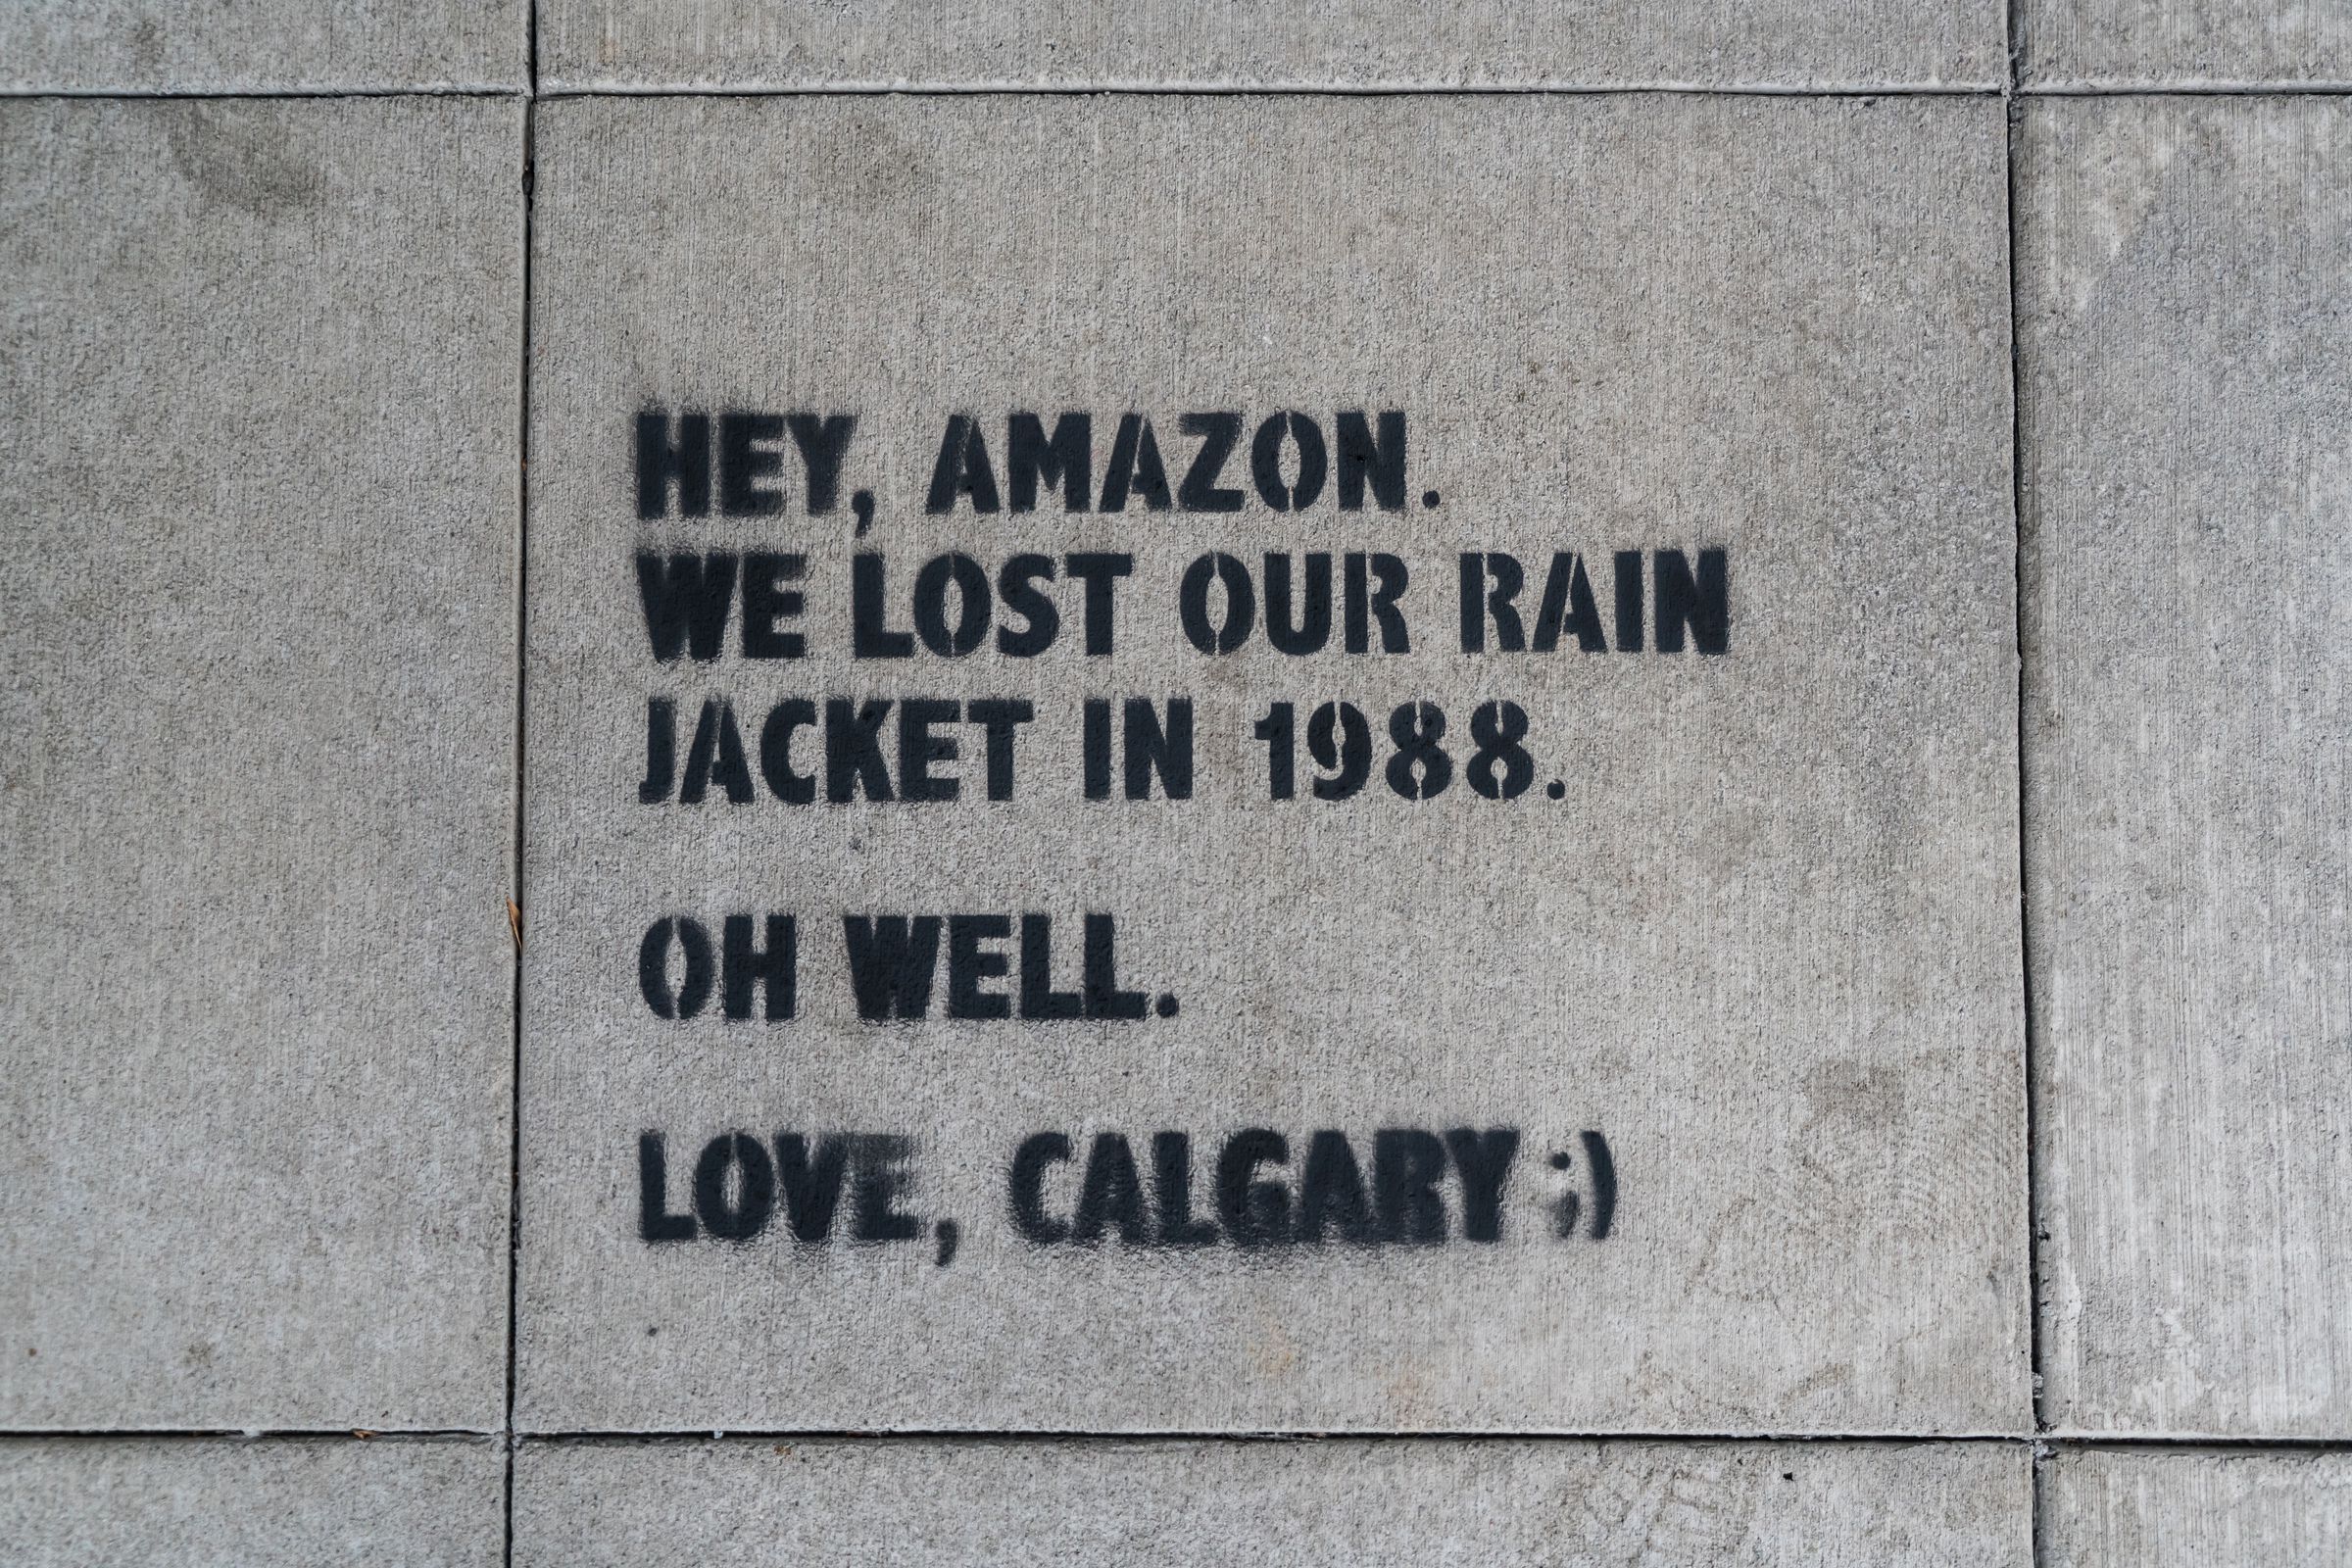 Graffiti promoting Calgary, tagged in Seattle, Amazon’s first headquarters.